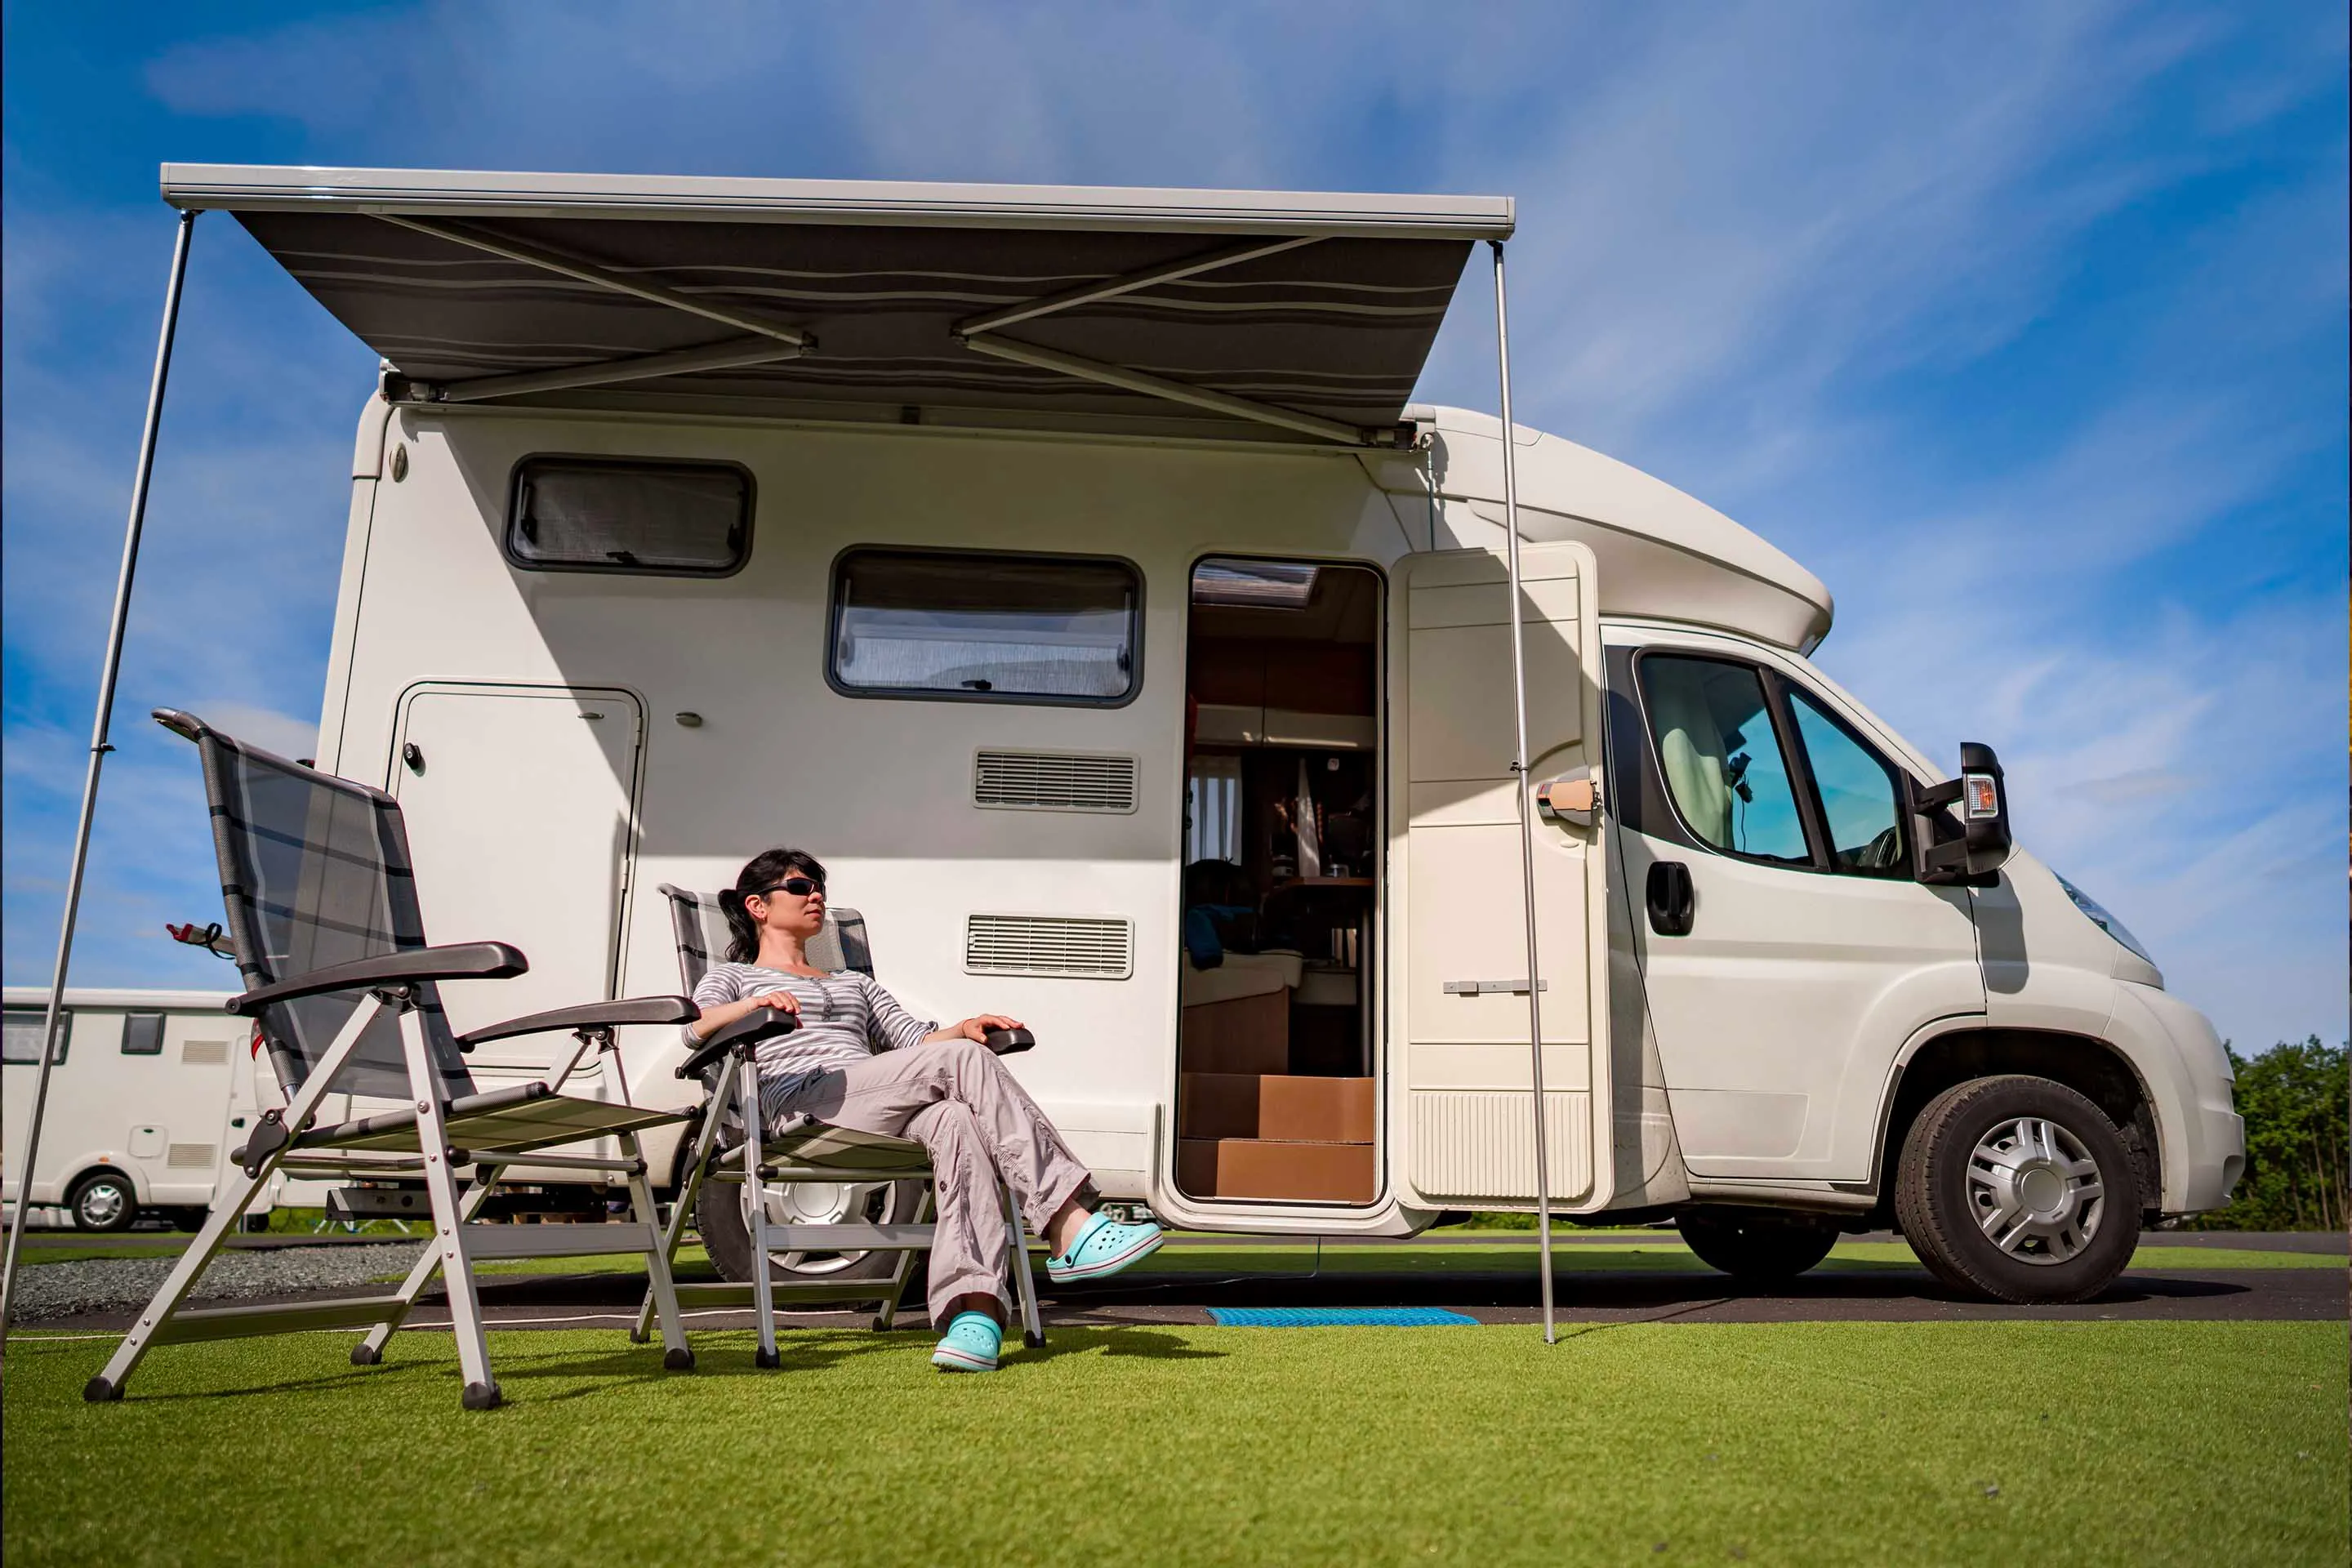 The Best Way To Rent an RV